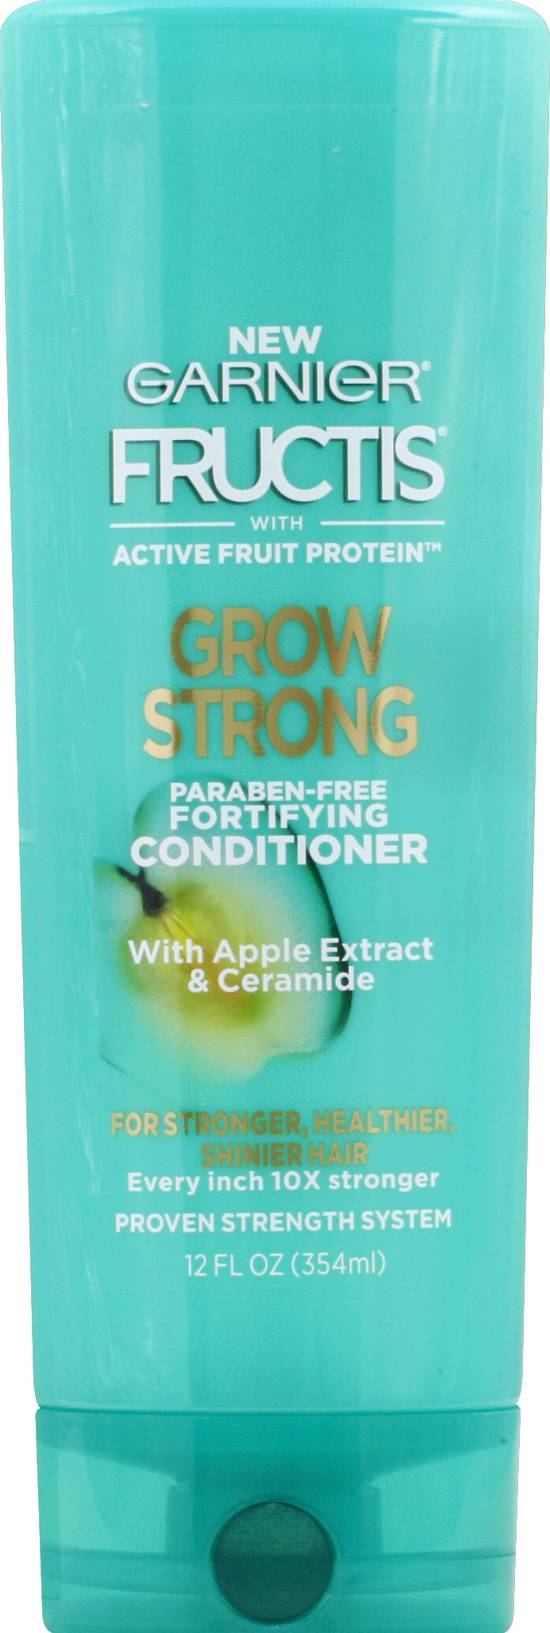 Fructis Garnier Grow Strong Fortifying Conditioner